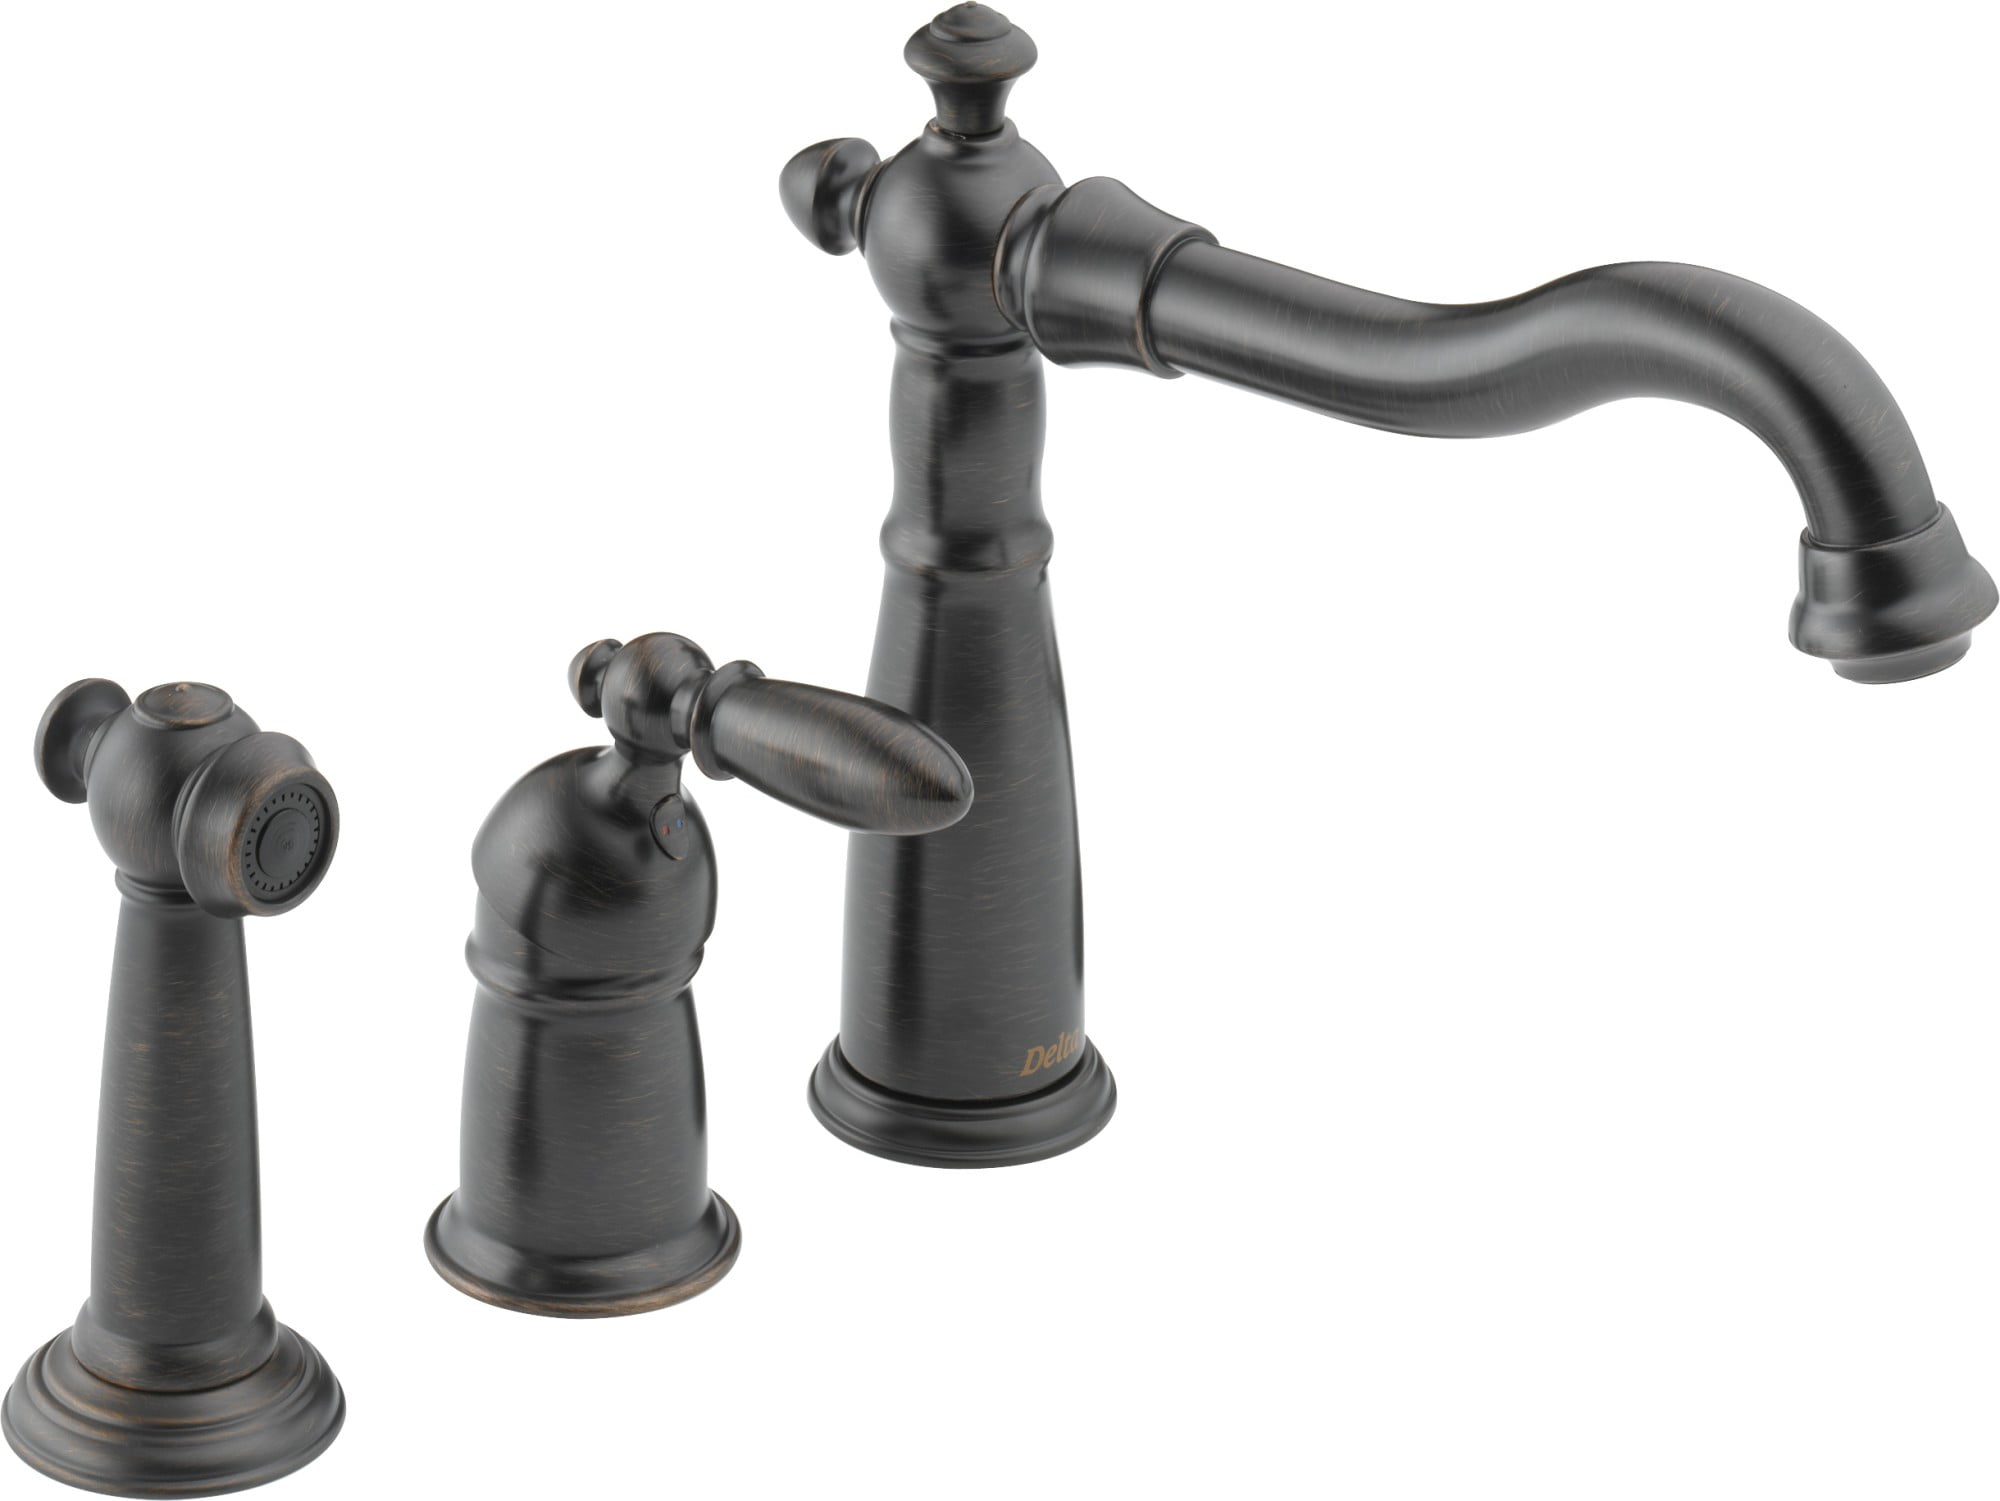 lowes delta kitchen sink one handle faucets